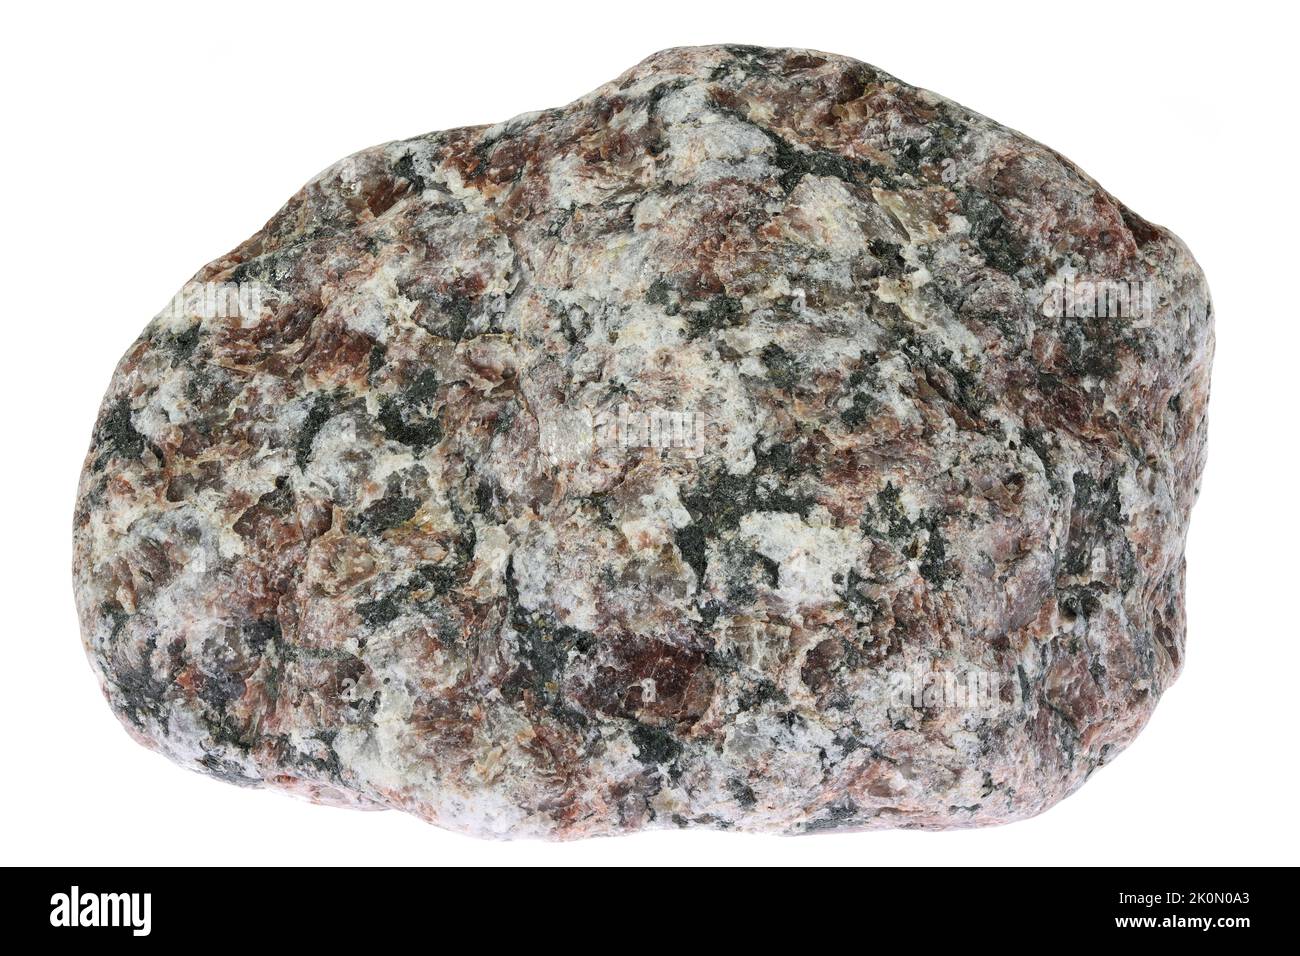 granite from the Baltic Sea coast in Waabs, Germany isolated on white background Stock Photo